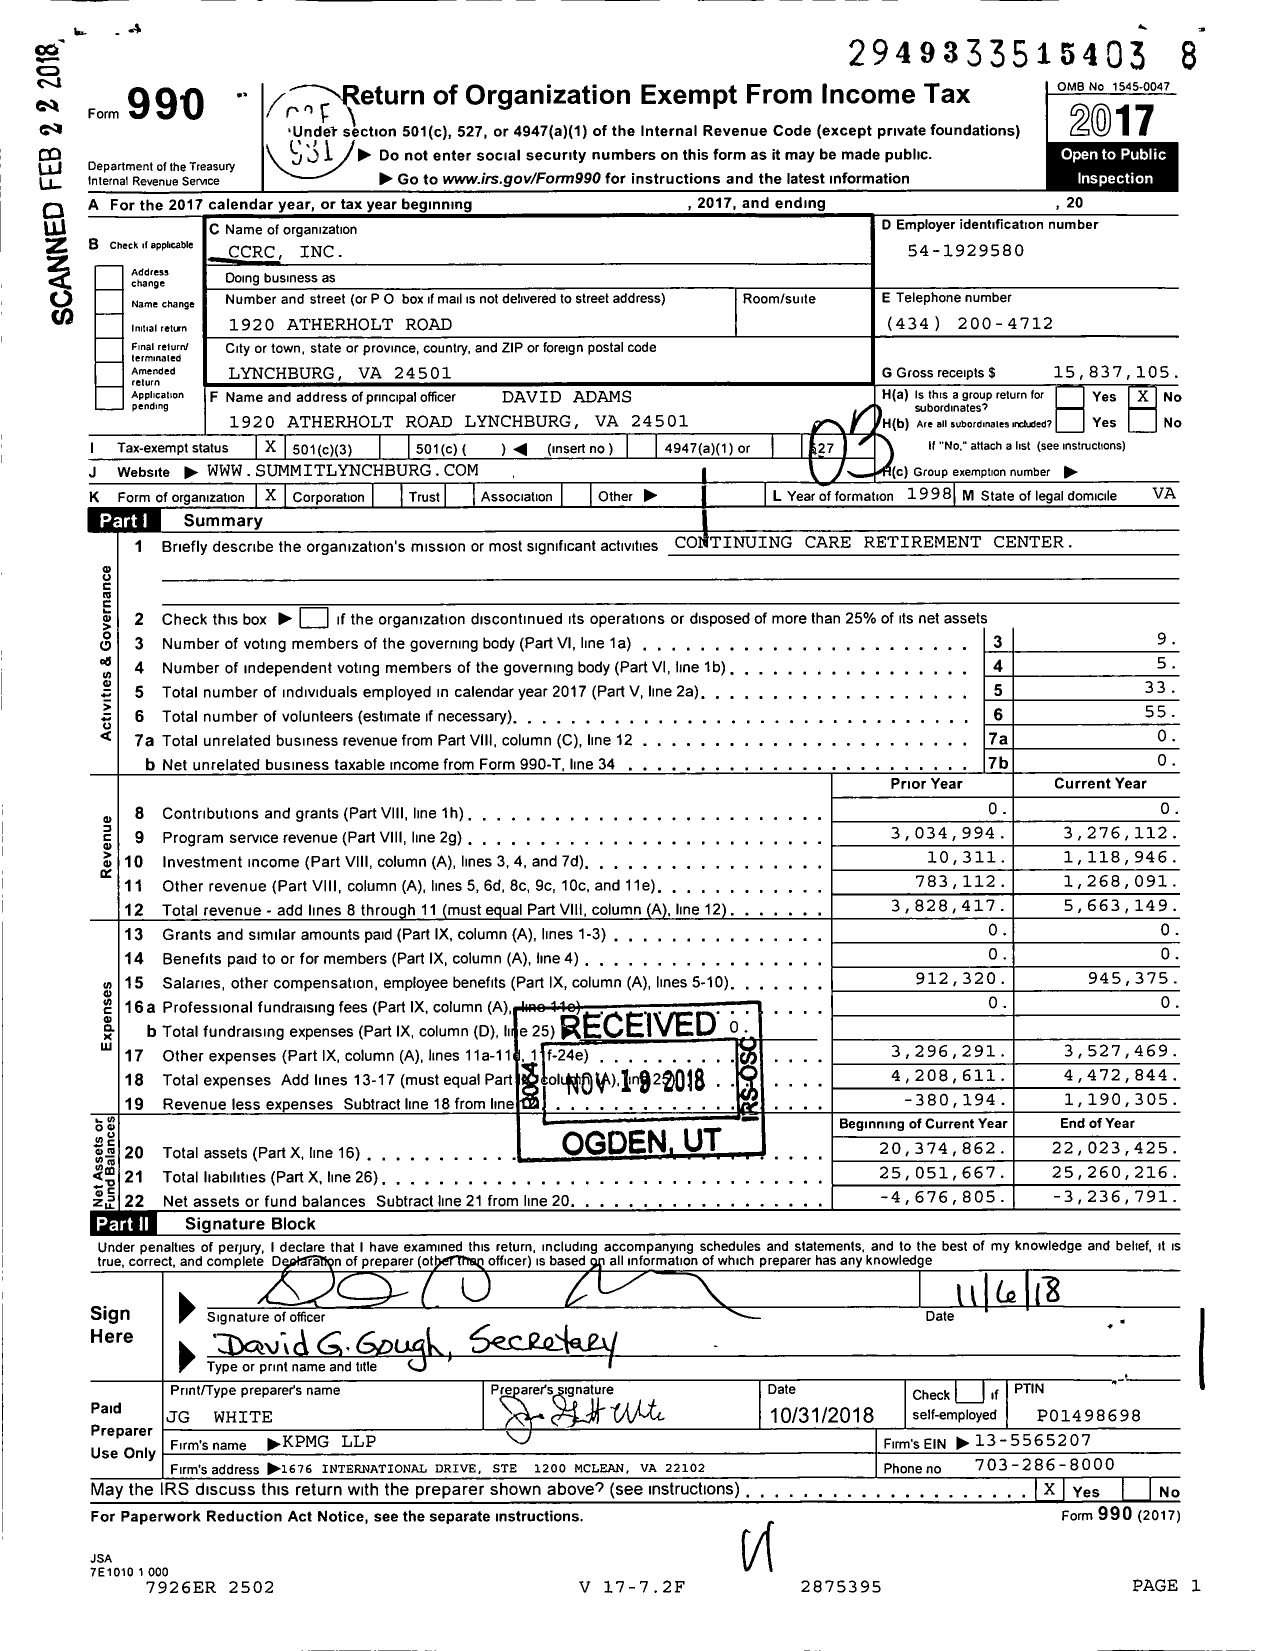 Image of first page of 2017 Form 990 for CCRC